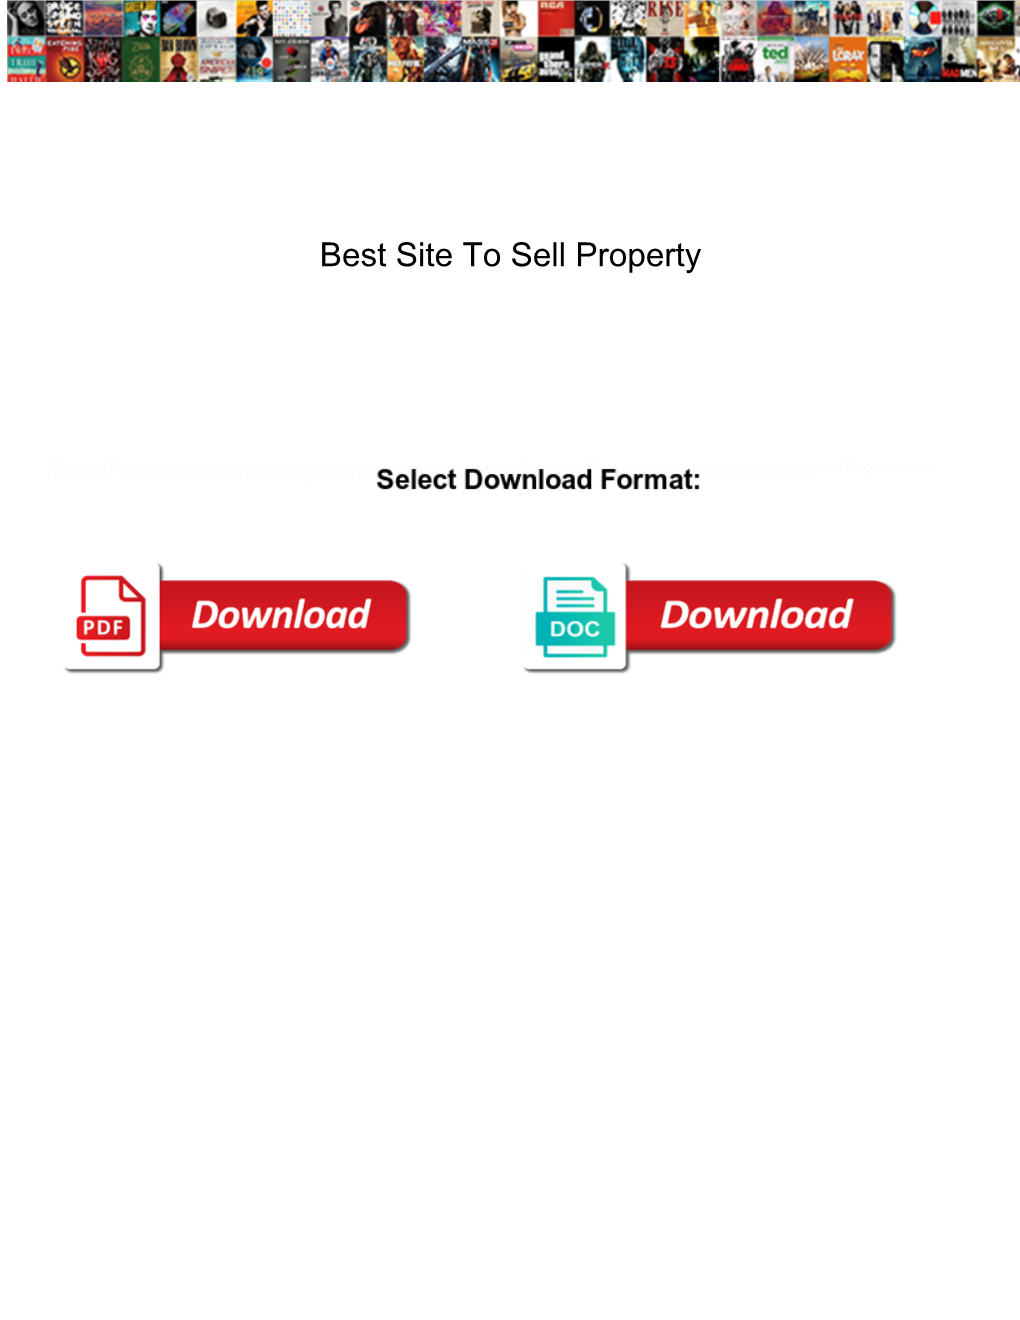 Best Site to Sell Property